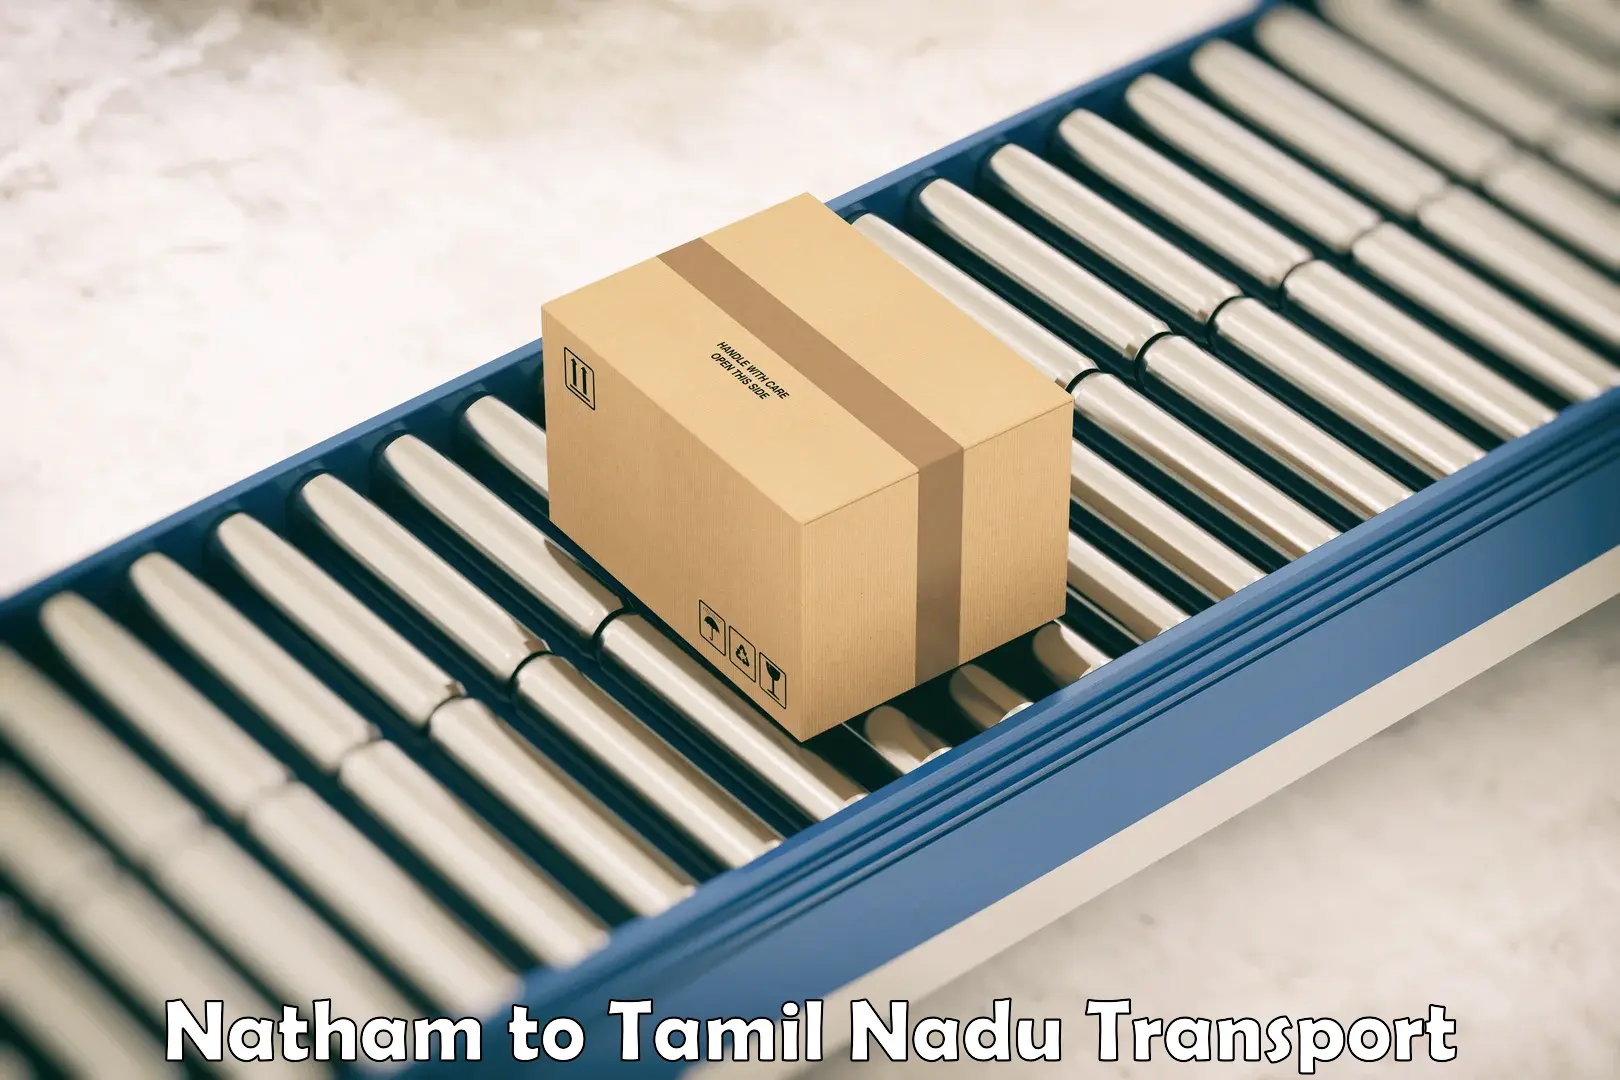 Delivery service Natham to Melmaruvathur